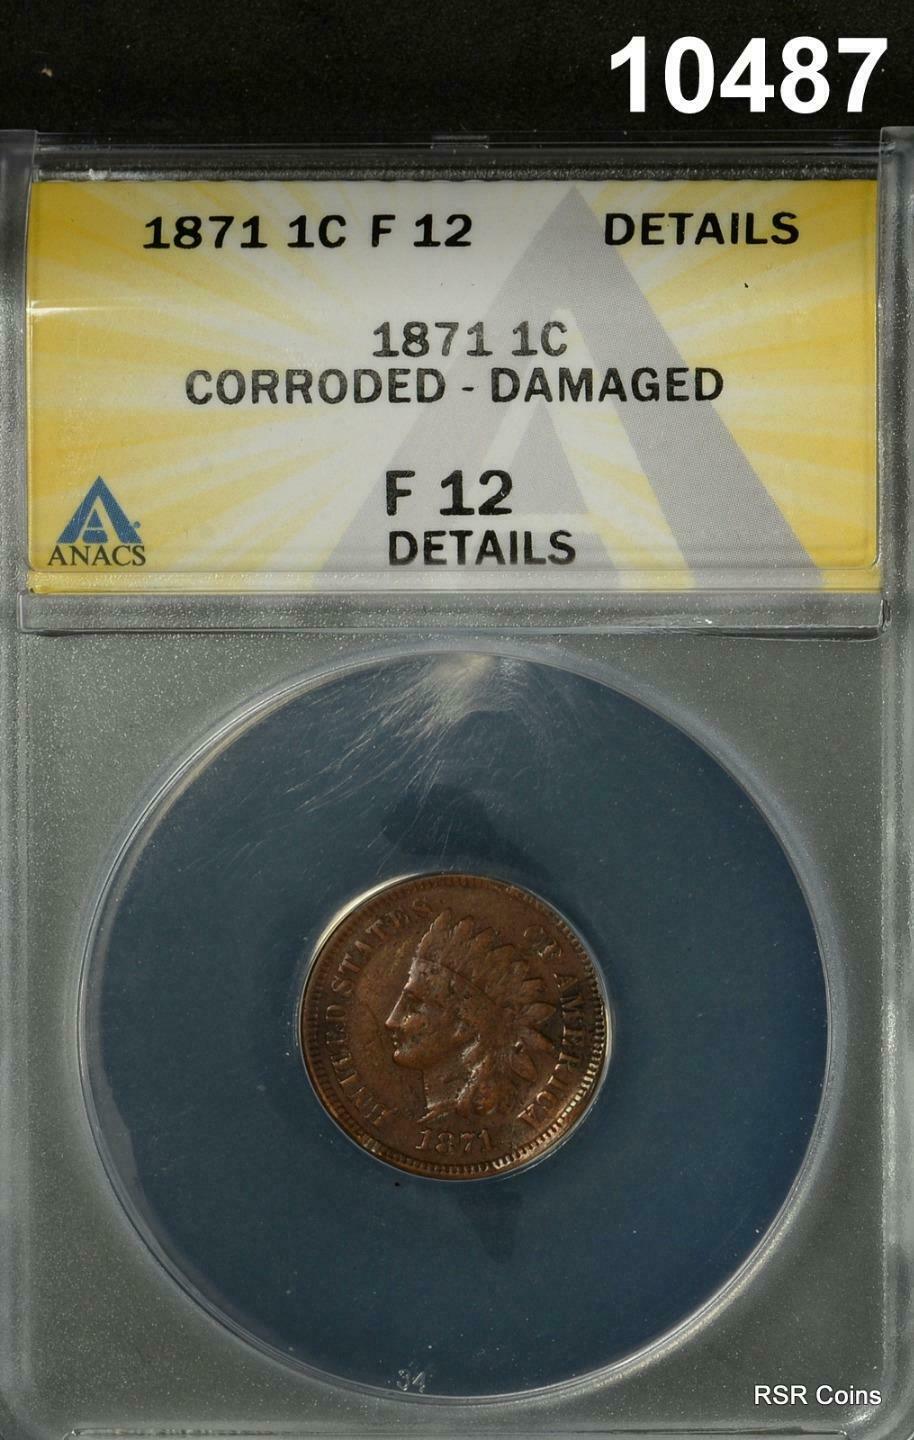 1871 INDIAN CENT ANACS CERTIFIED FINE 12 CORRODED DAMAGED #10487